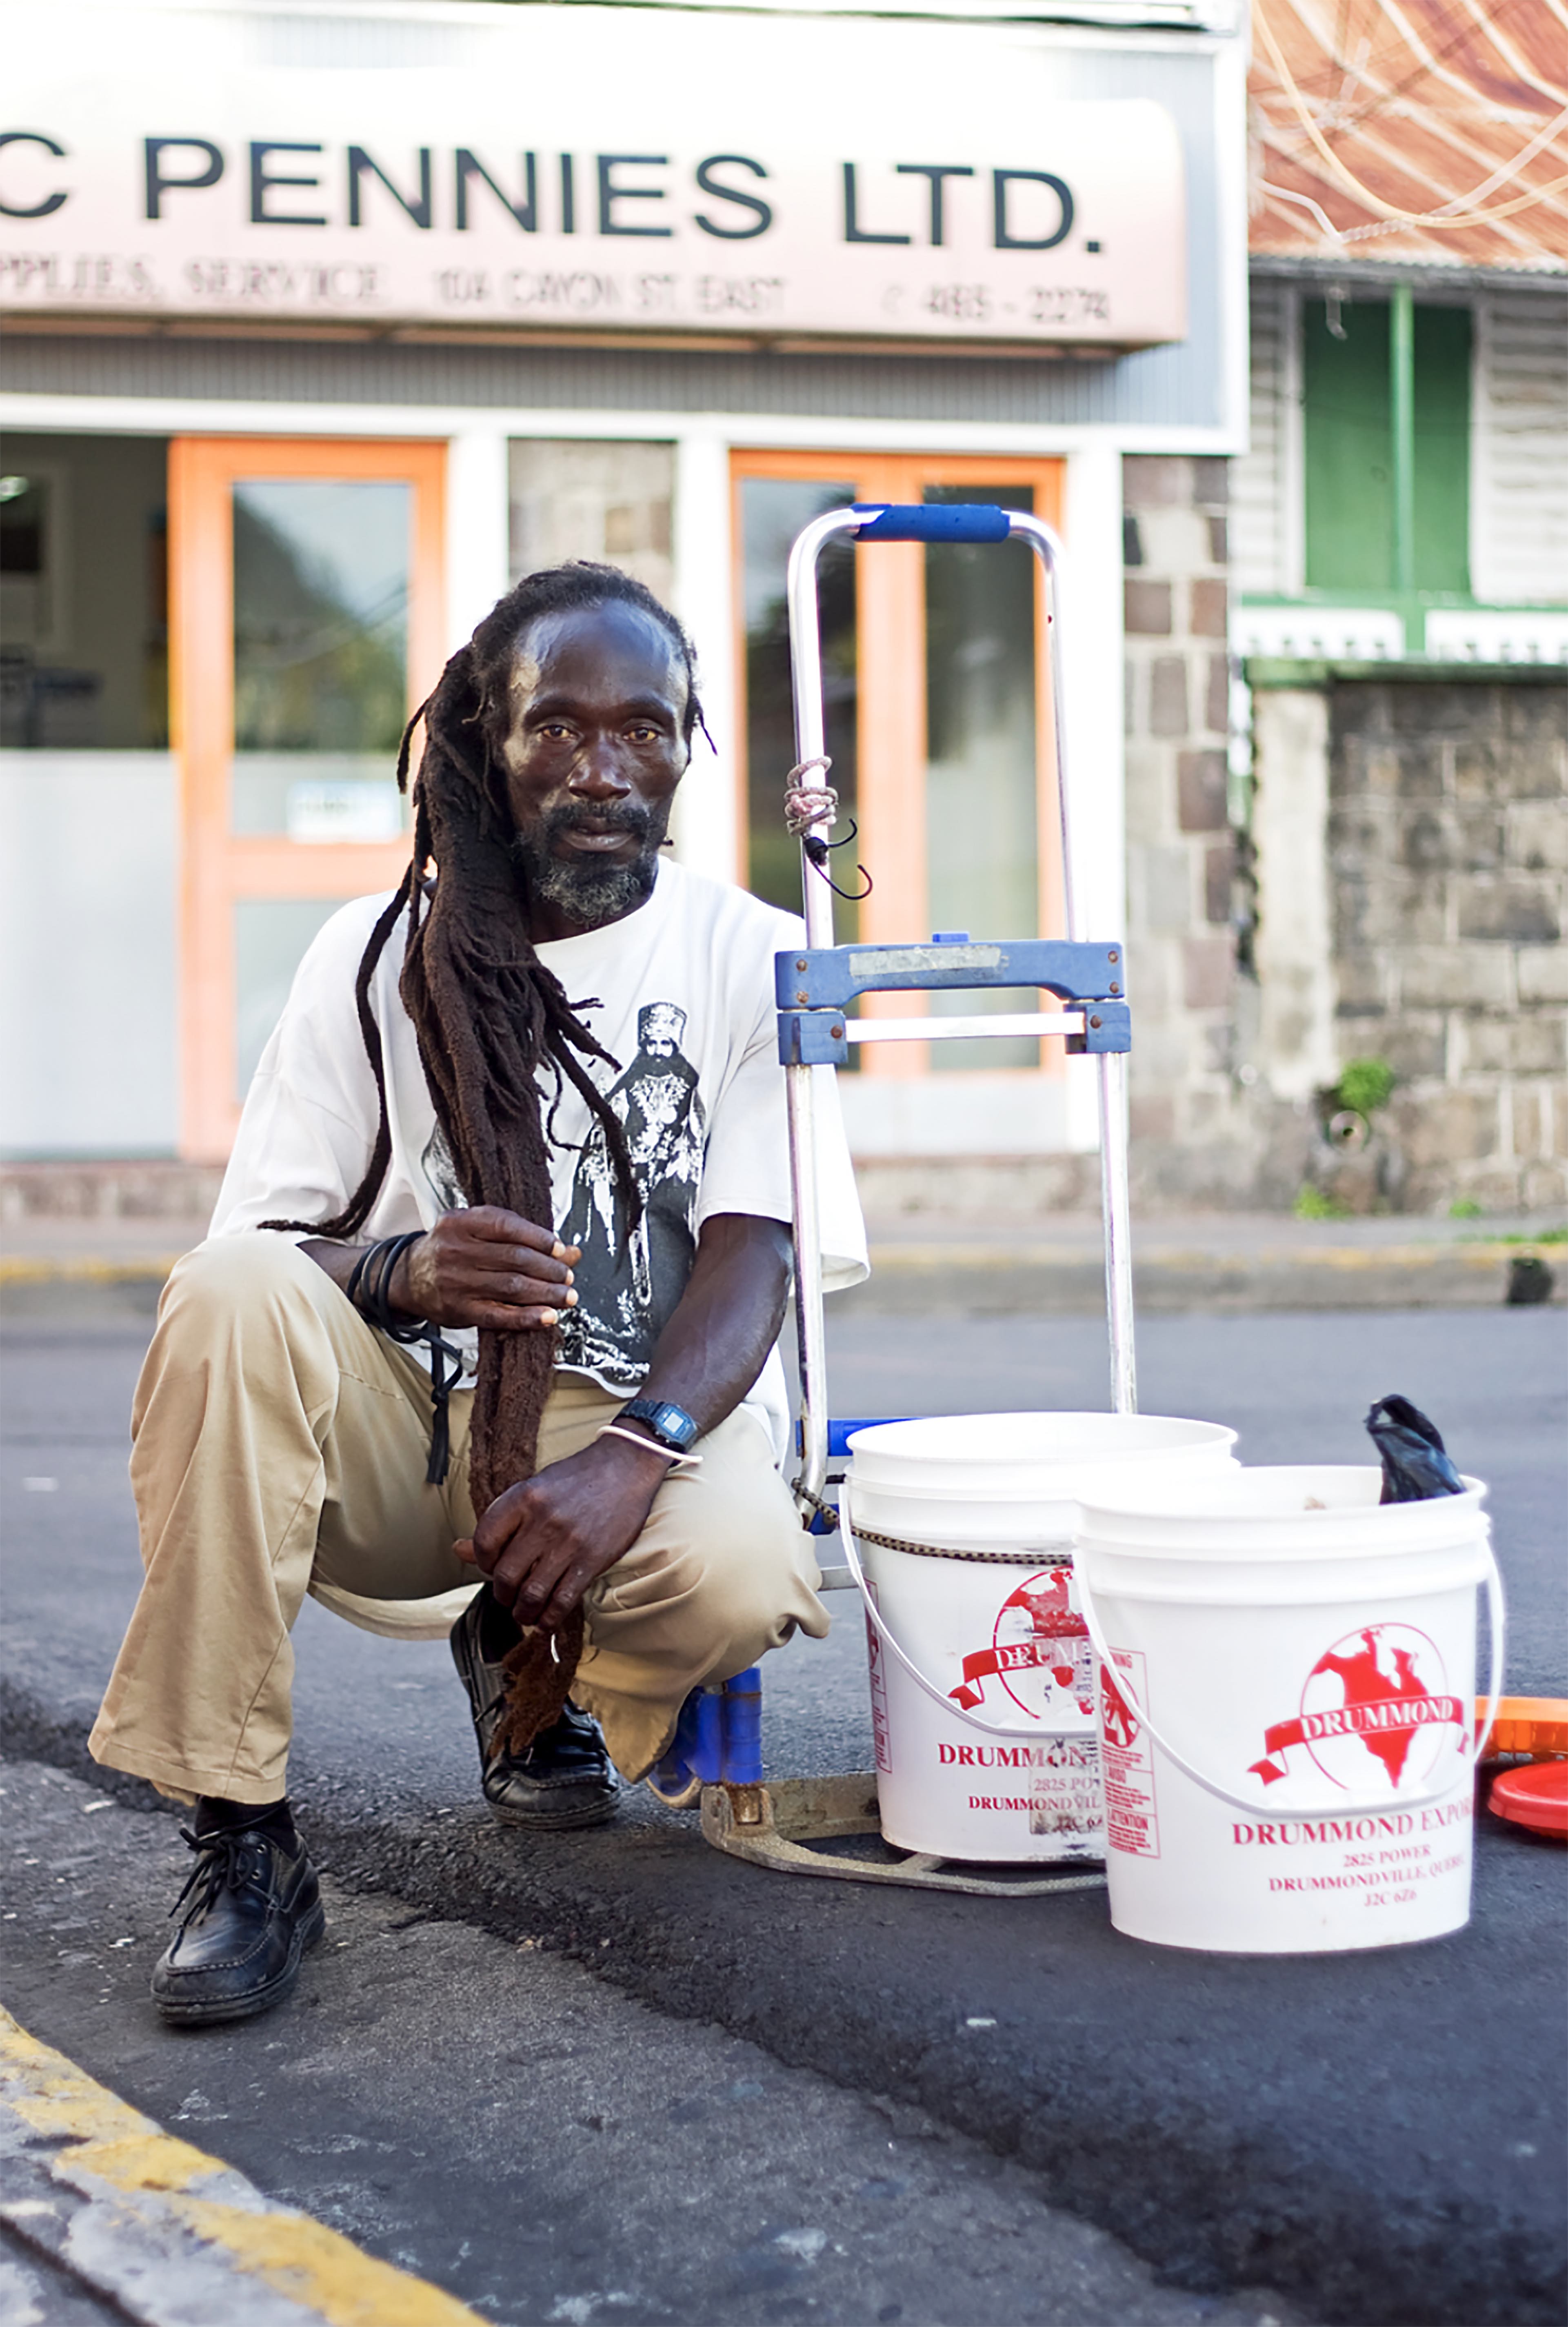 Dreadlocked man squatting next to handtruck and white plastic bins, on the curb.